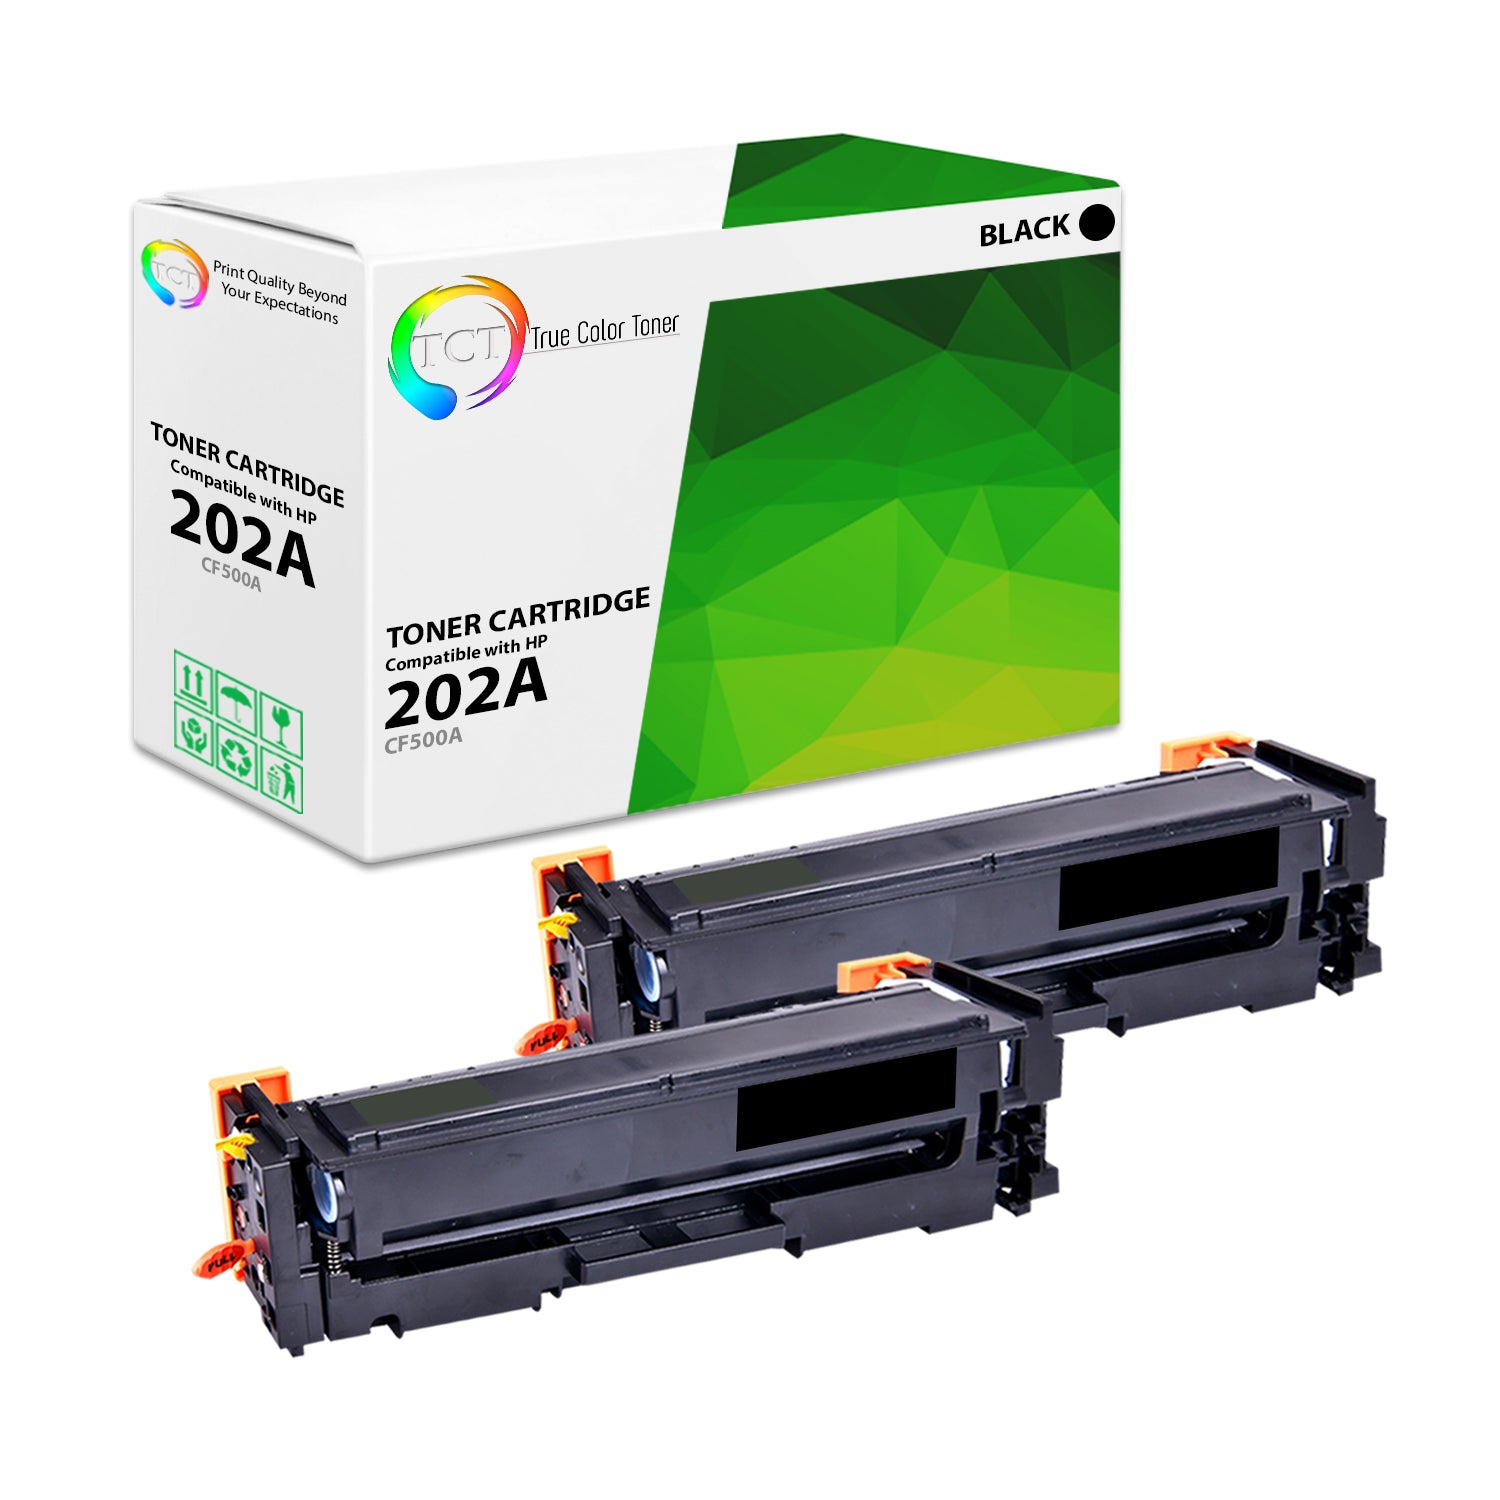 TCT Compatible Toner Cartridge Replacement for the HP 202A Series - 2 Pack Black